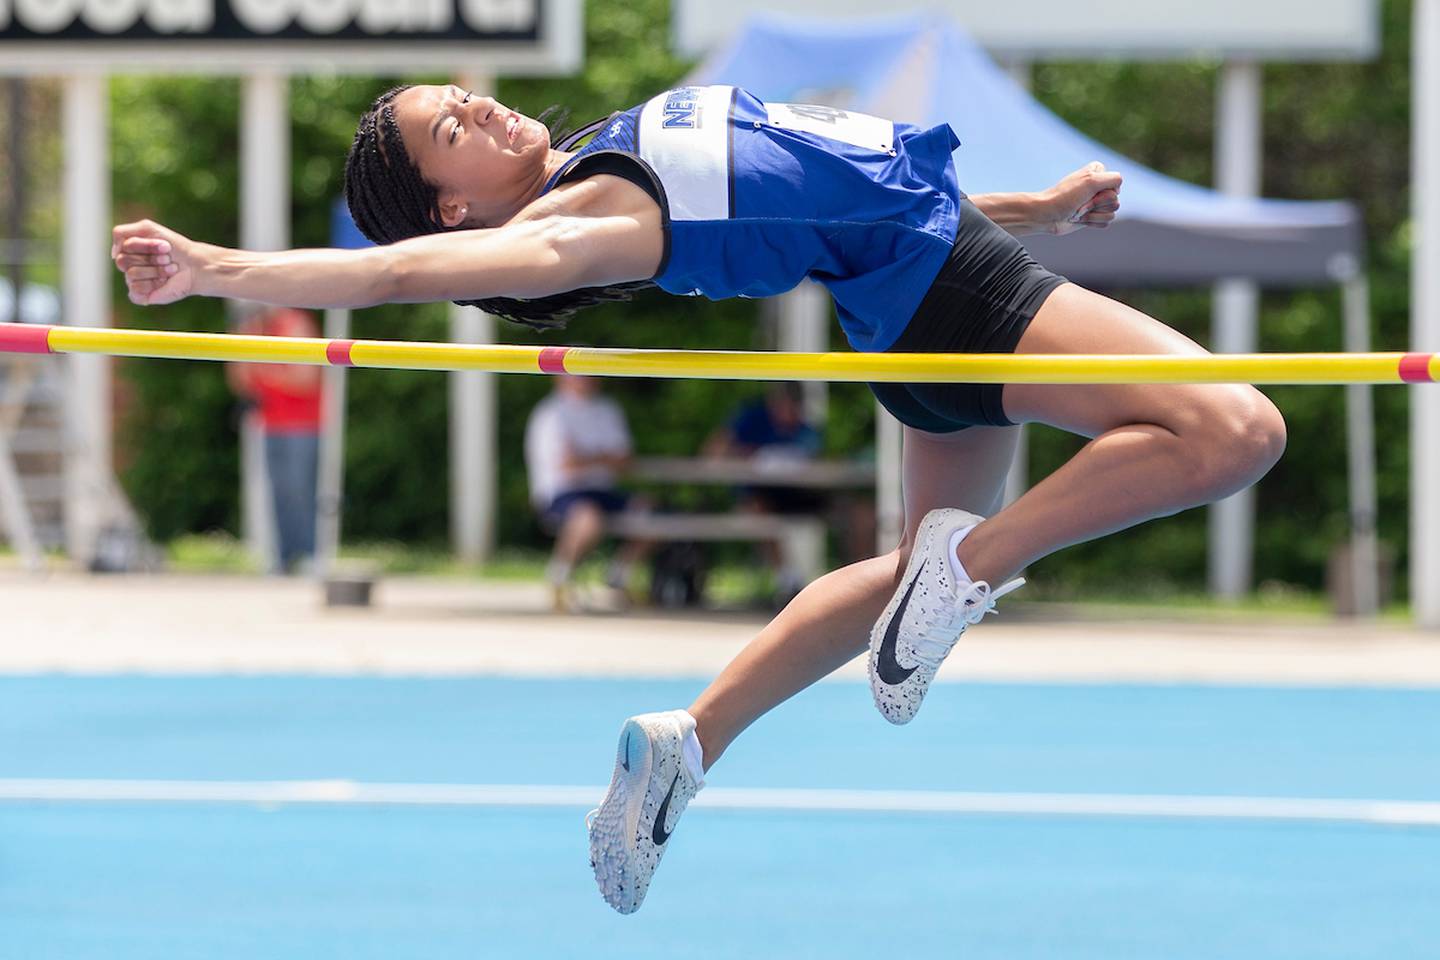 Newark's Kiara Wesseh competes in the Class 1A high jump during the IHSA State Track and Field Finals on June 10, 2021, in Charleston.